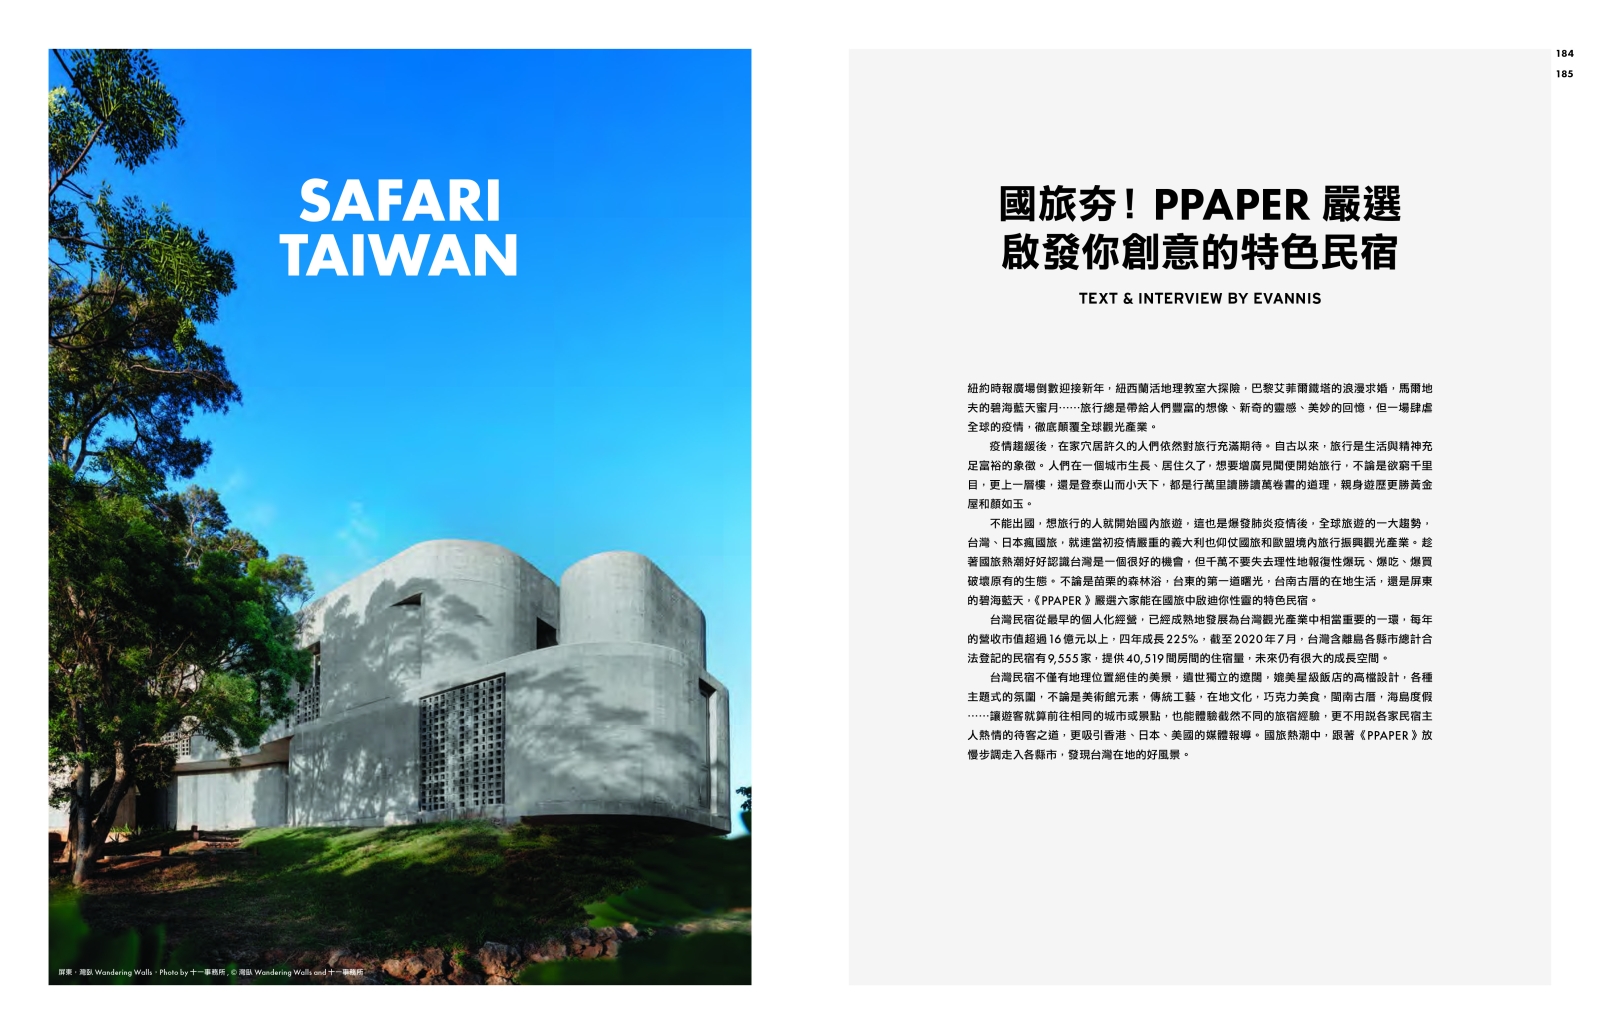 PPAPER design magazine reported the Wandering Walls